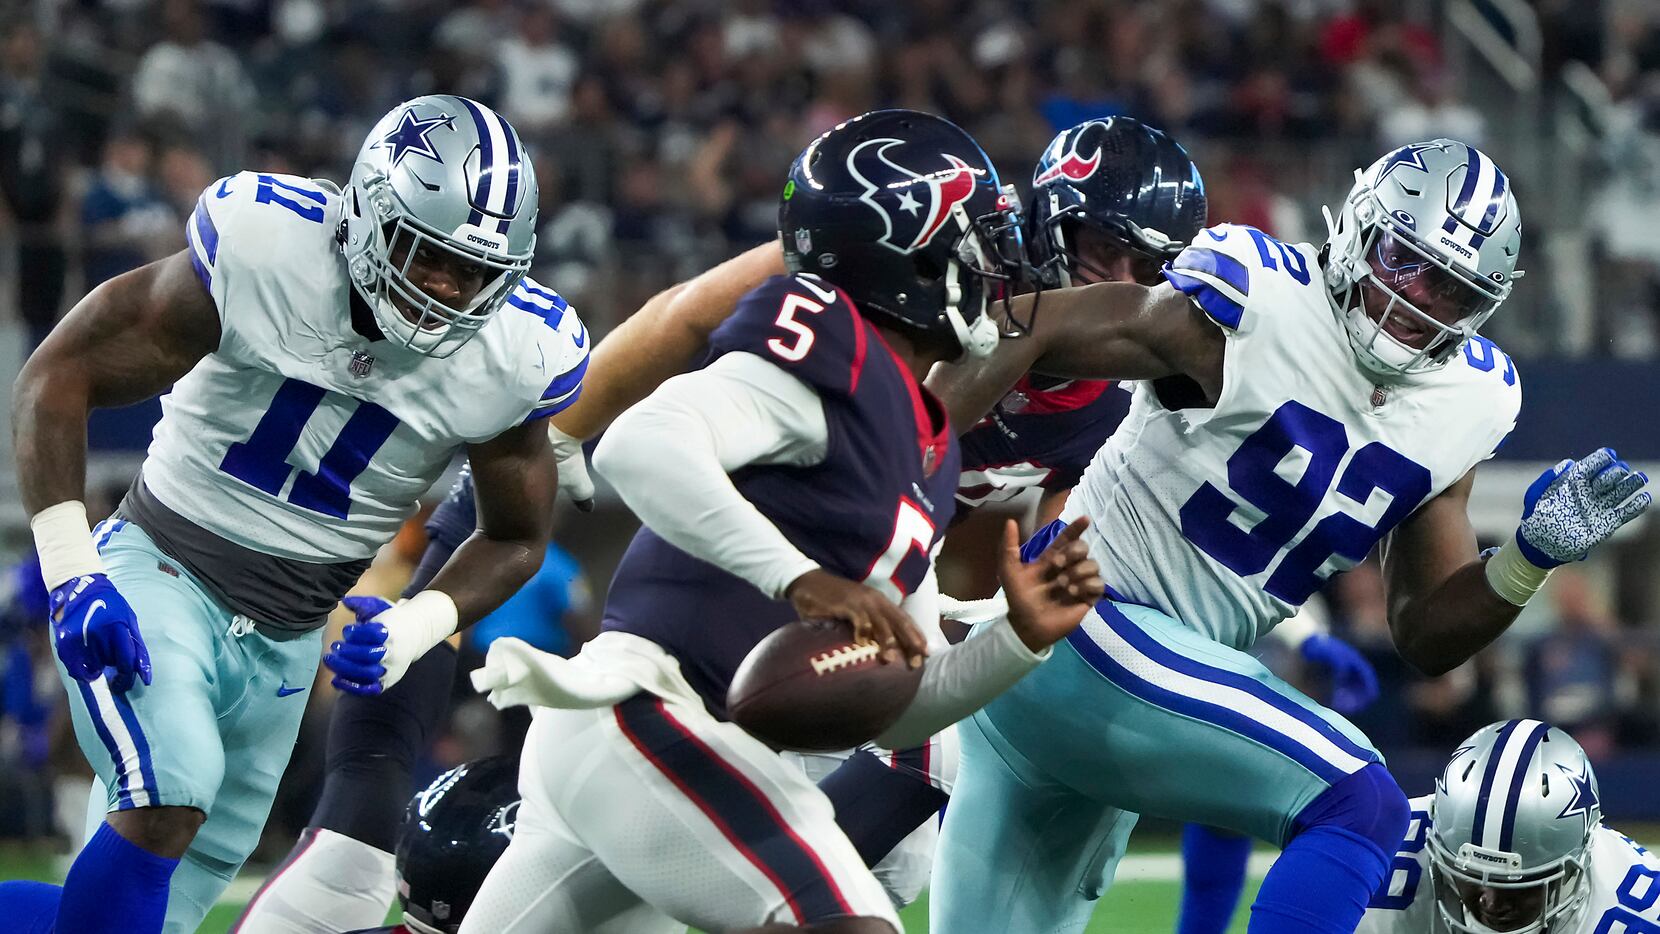 While Cowboys remain winless in preseason play, their new-look